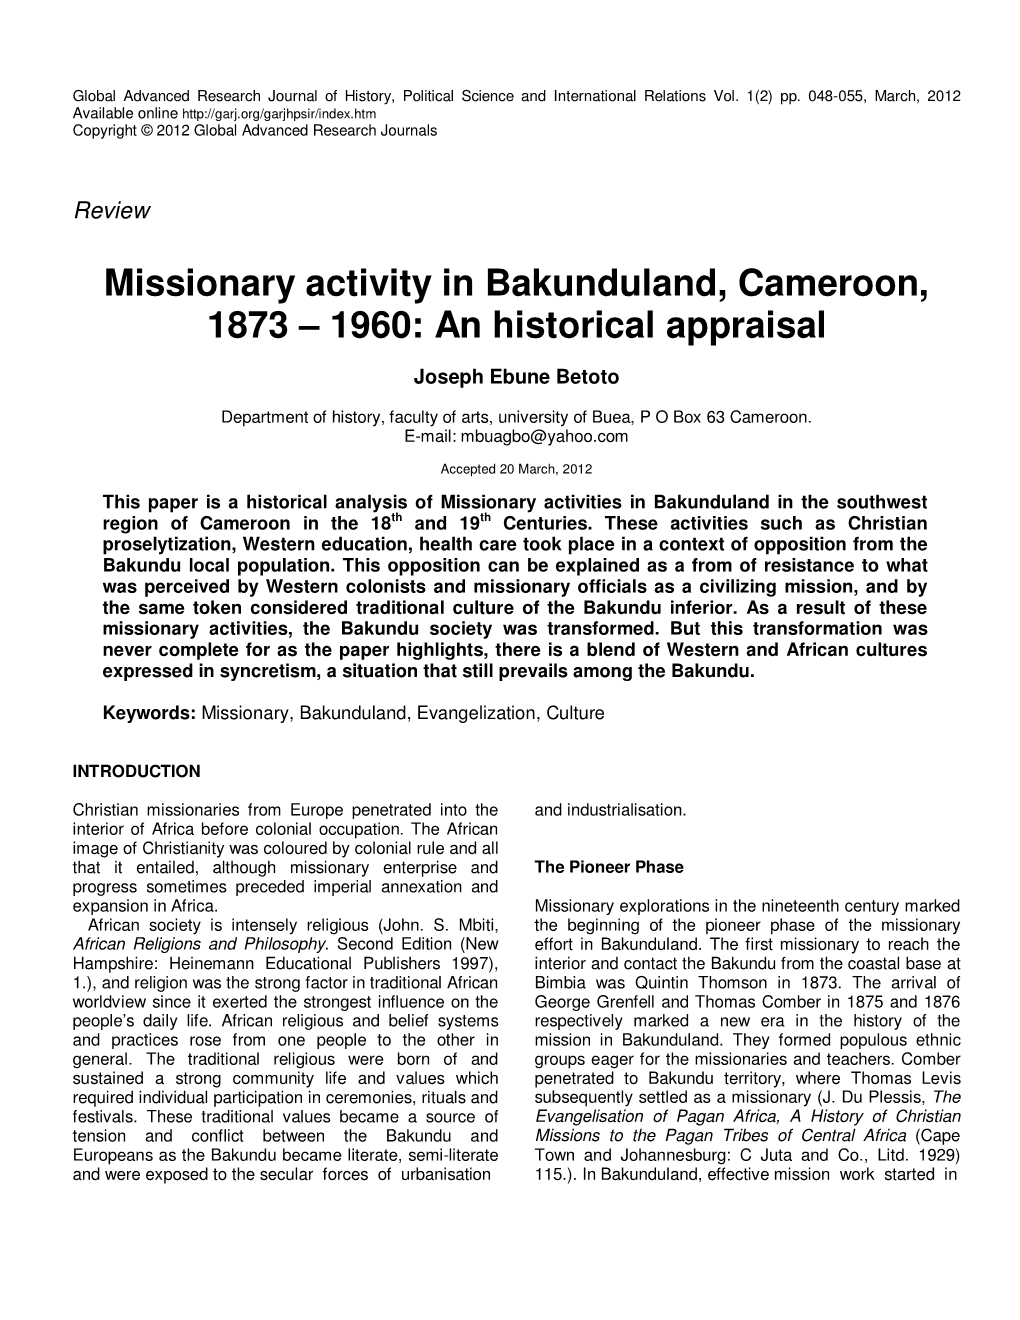 Missionary Activity in Bakunduland, Cameroon, 1873 – 1960: an Historical Appraisal